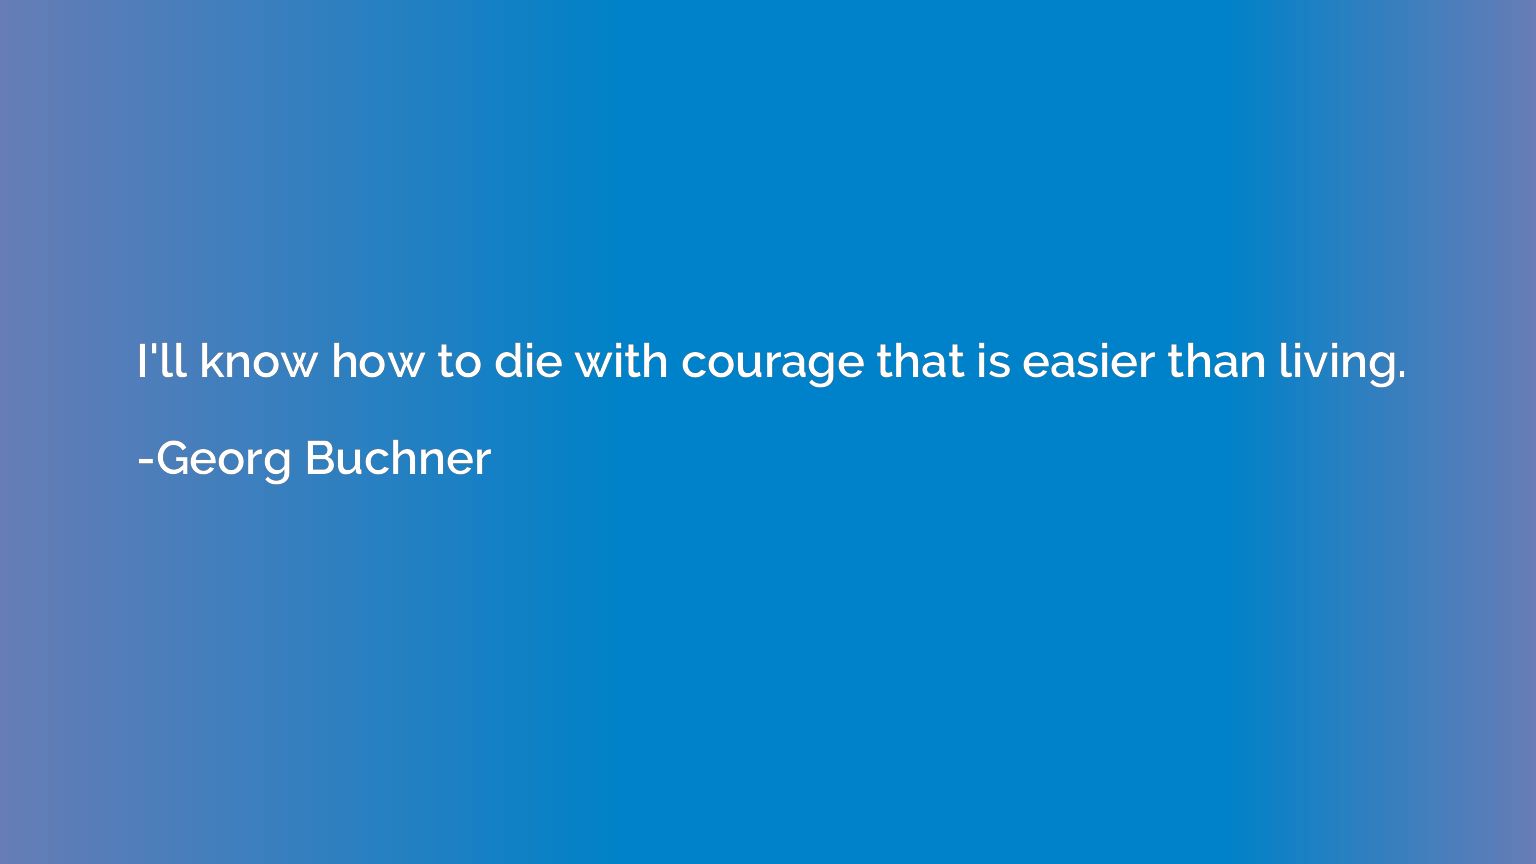 I'll know how to die with courage that is easier than living